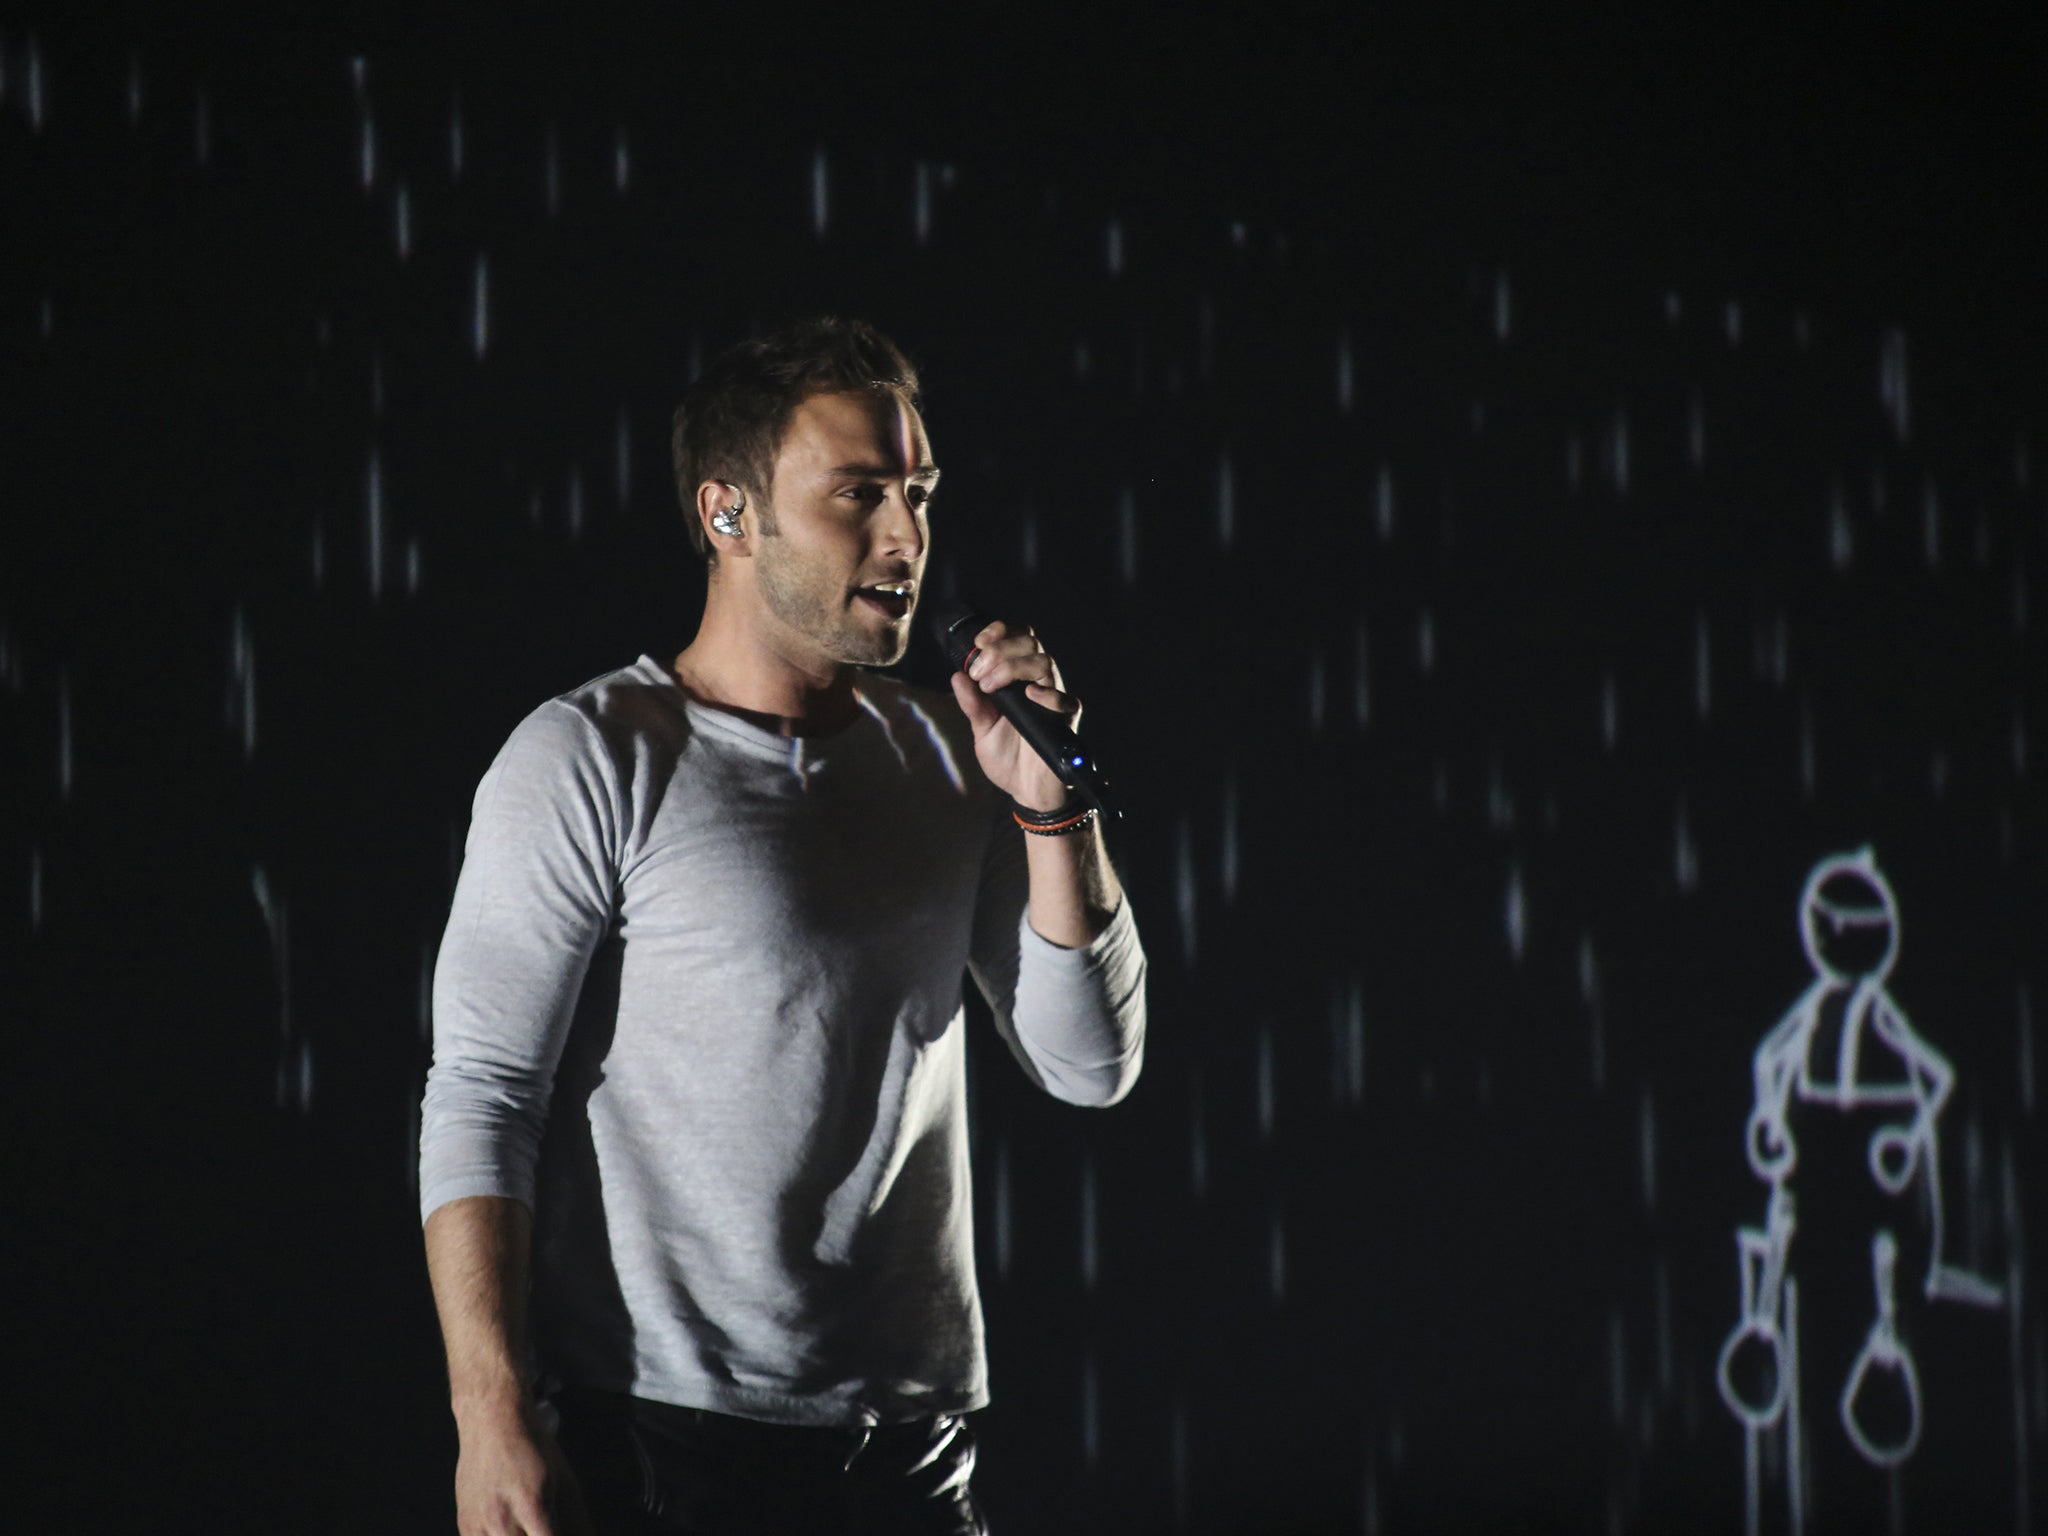 Måns Zelmerlöw performing 'Heroes' for Sweden in the Eurovision song contest 2015